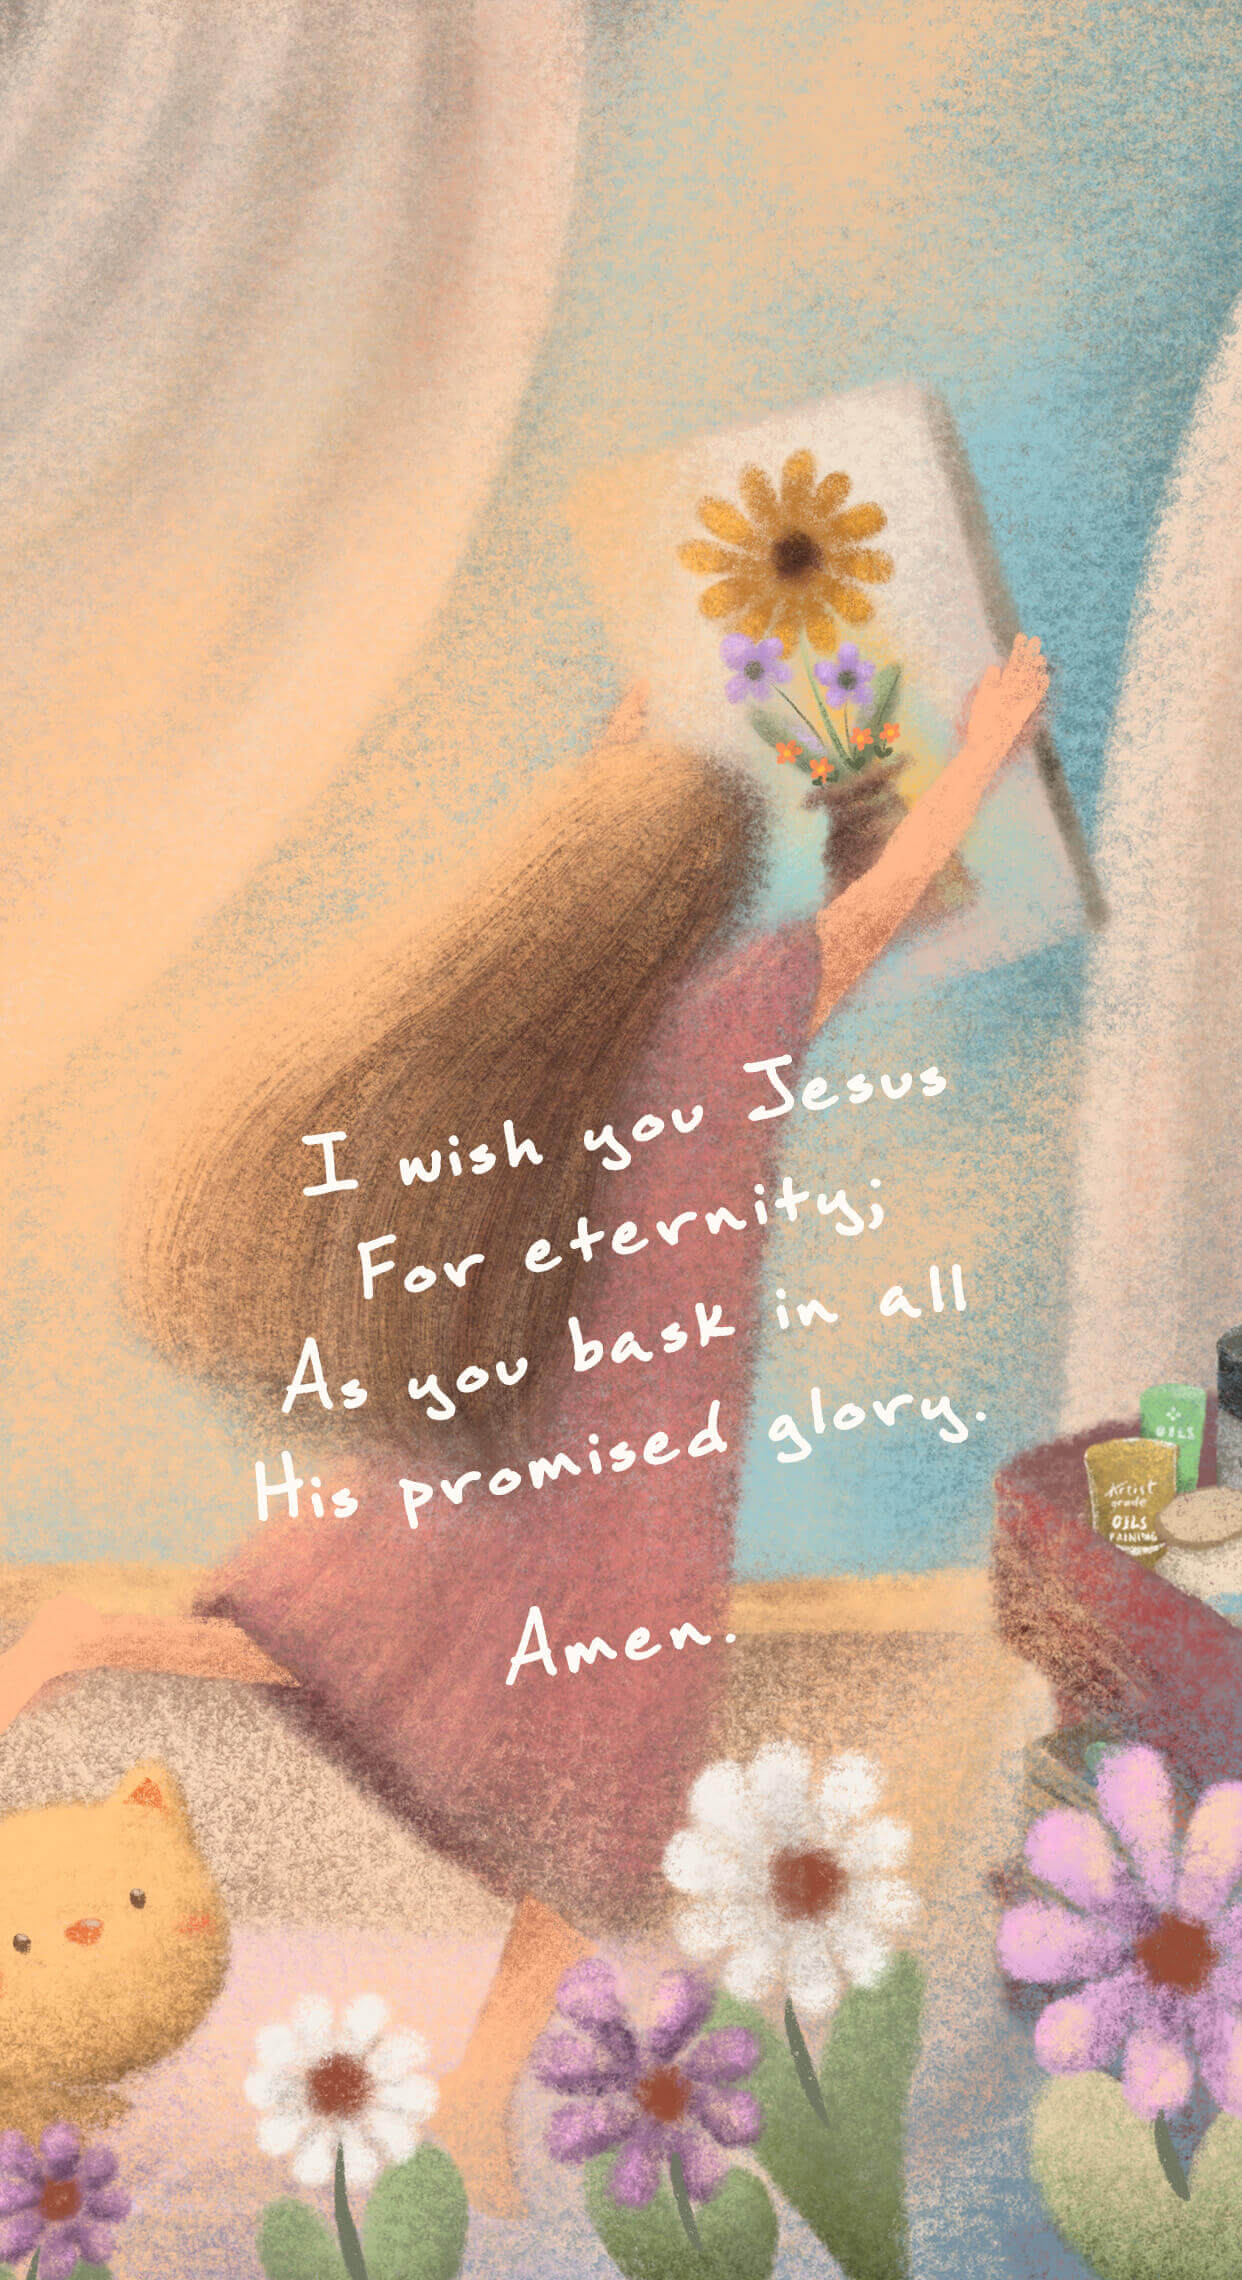 I wish you Jesus For eternity; As you bask in all His promised glory. Amen.